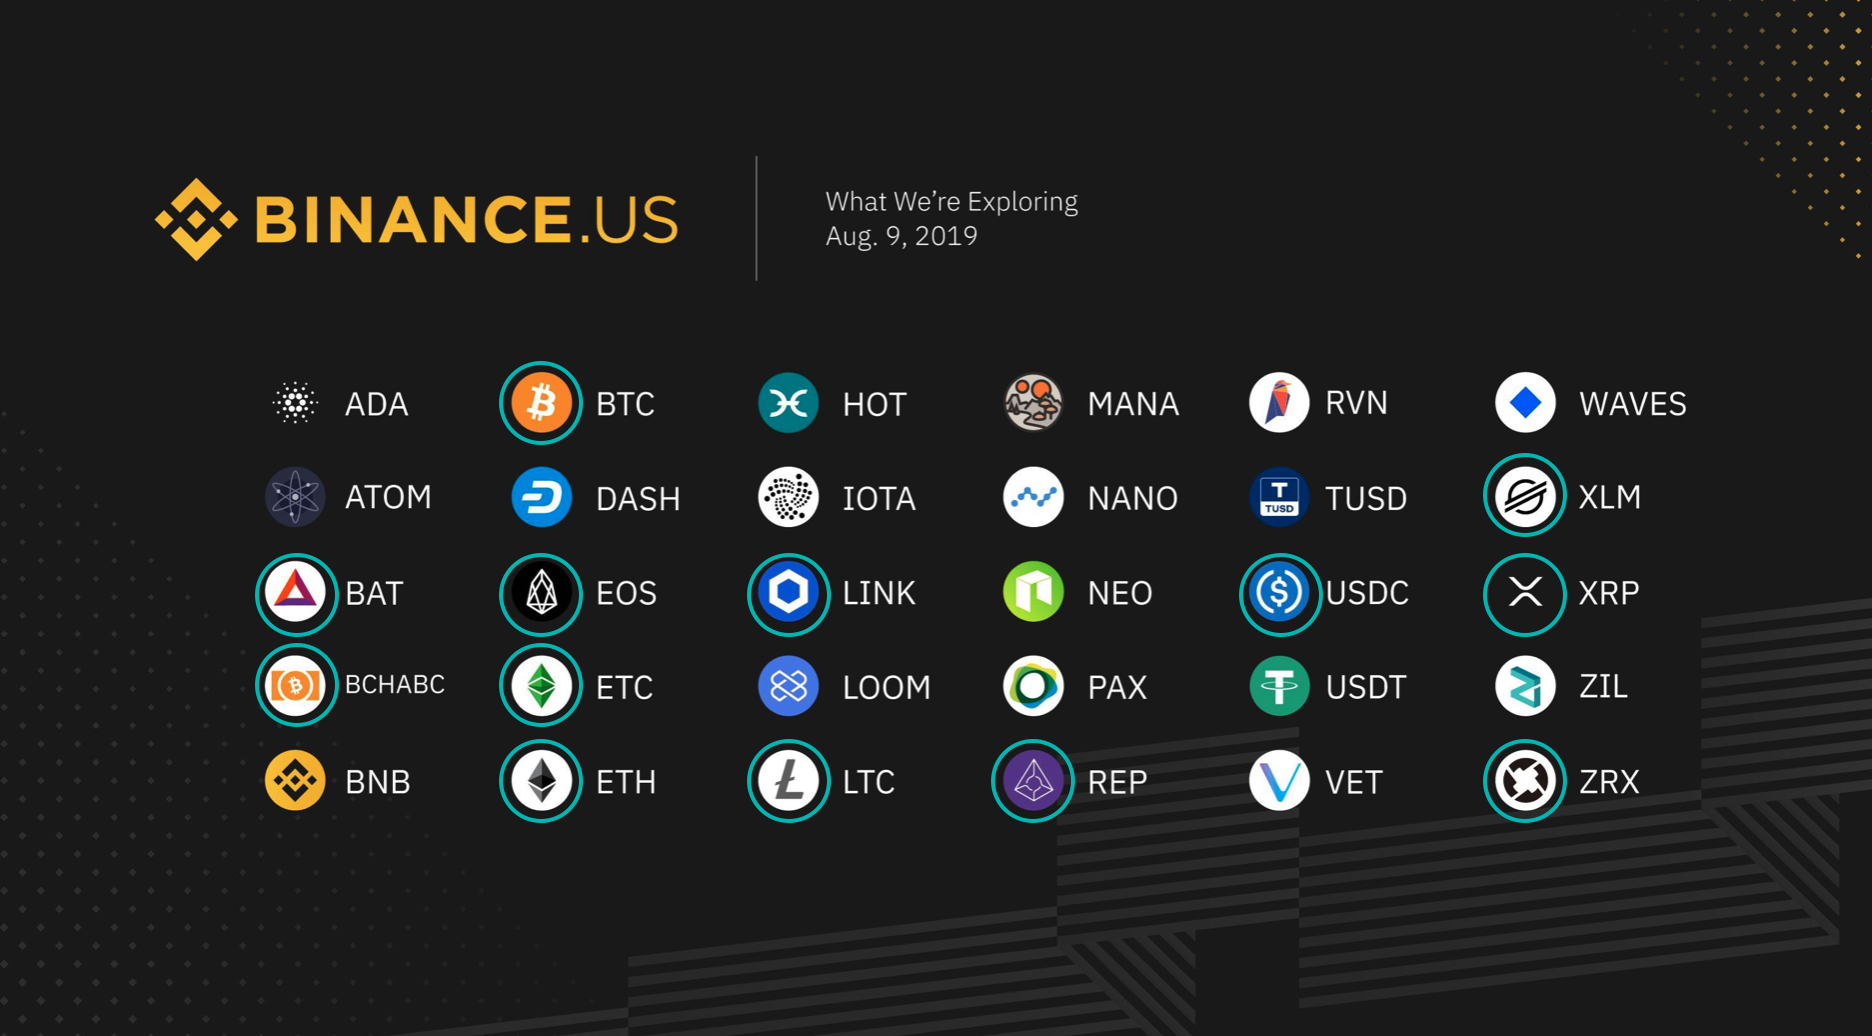 25 Upcoming Binance Listings to Watch in March 